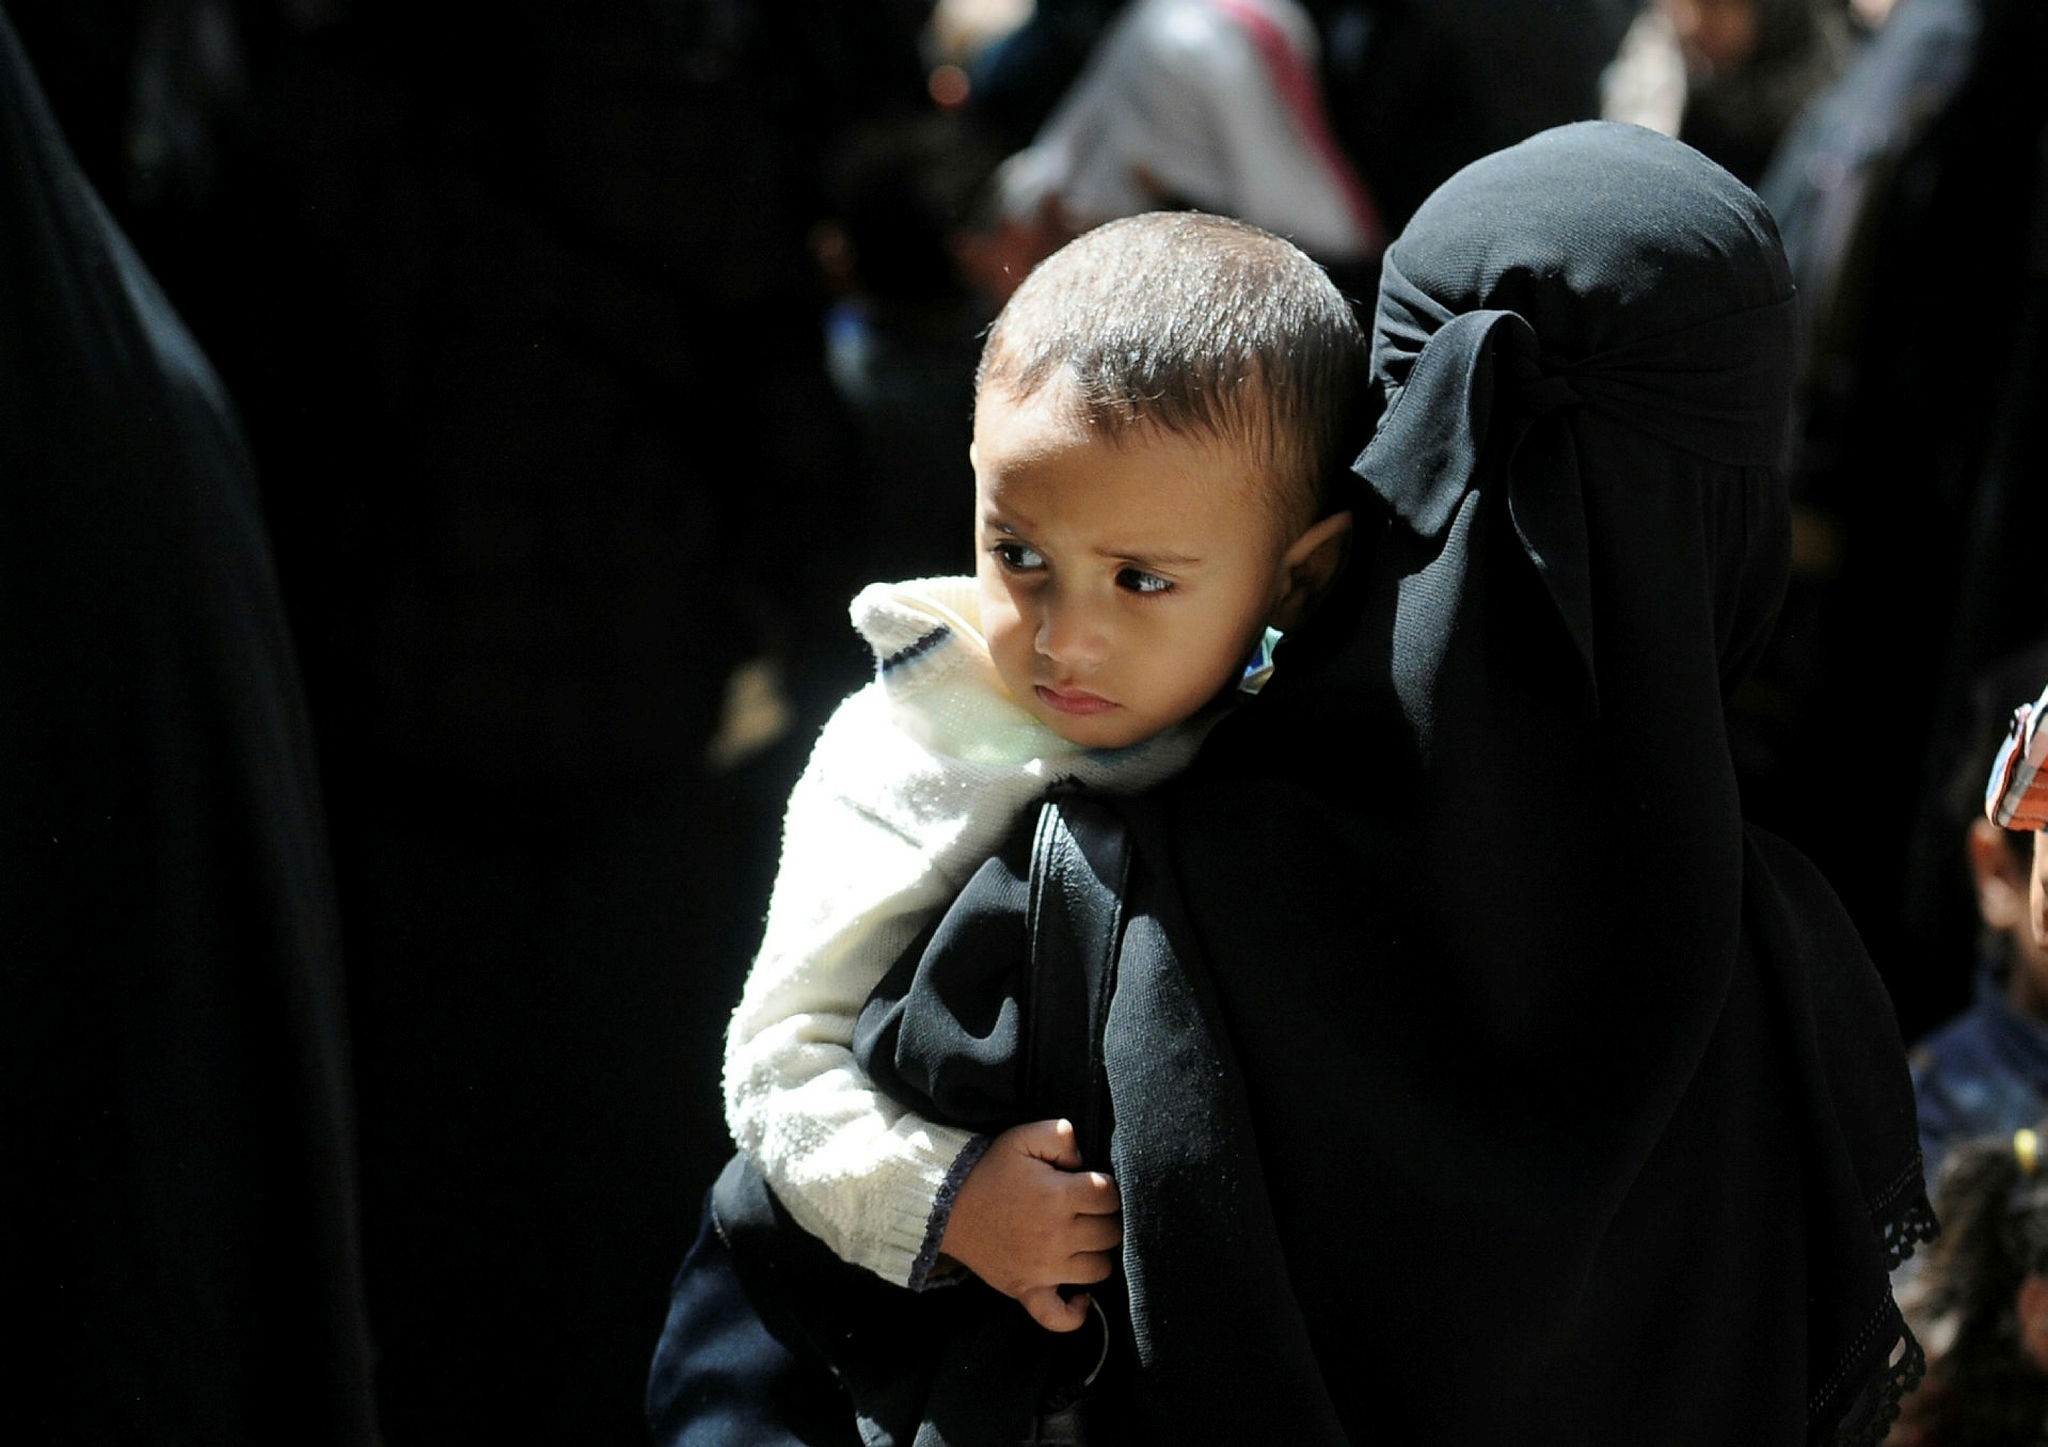 Yemeni woman waits to get her children vaccinated against diphtheria at a health center in Sanaa, March 13.